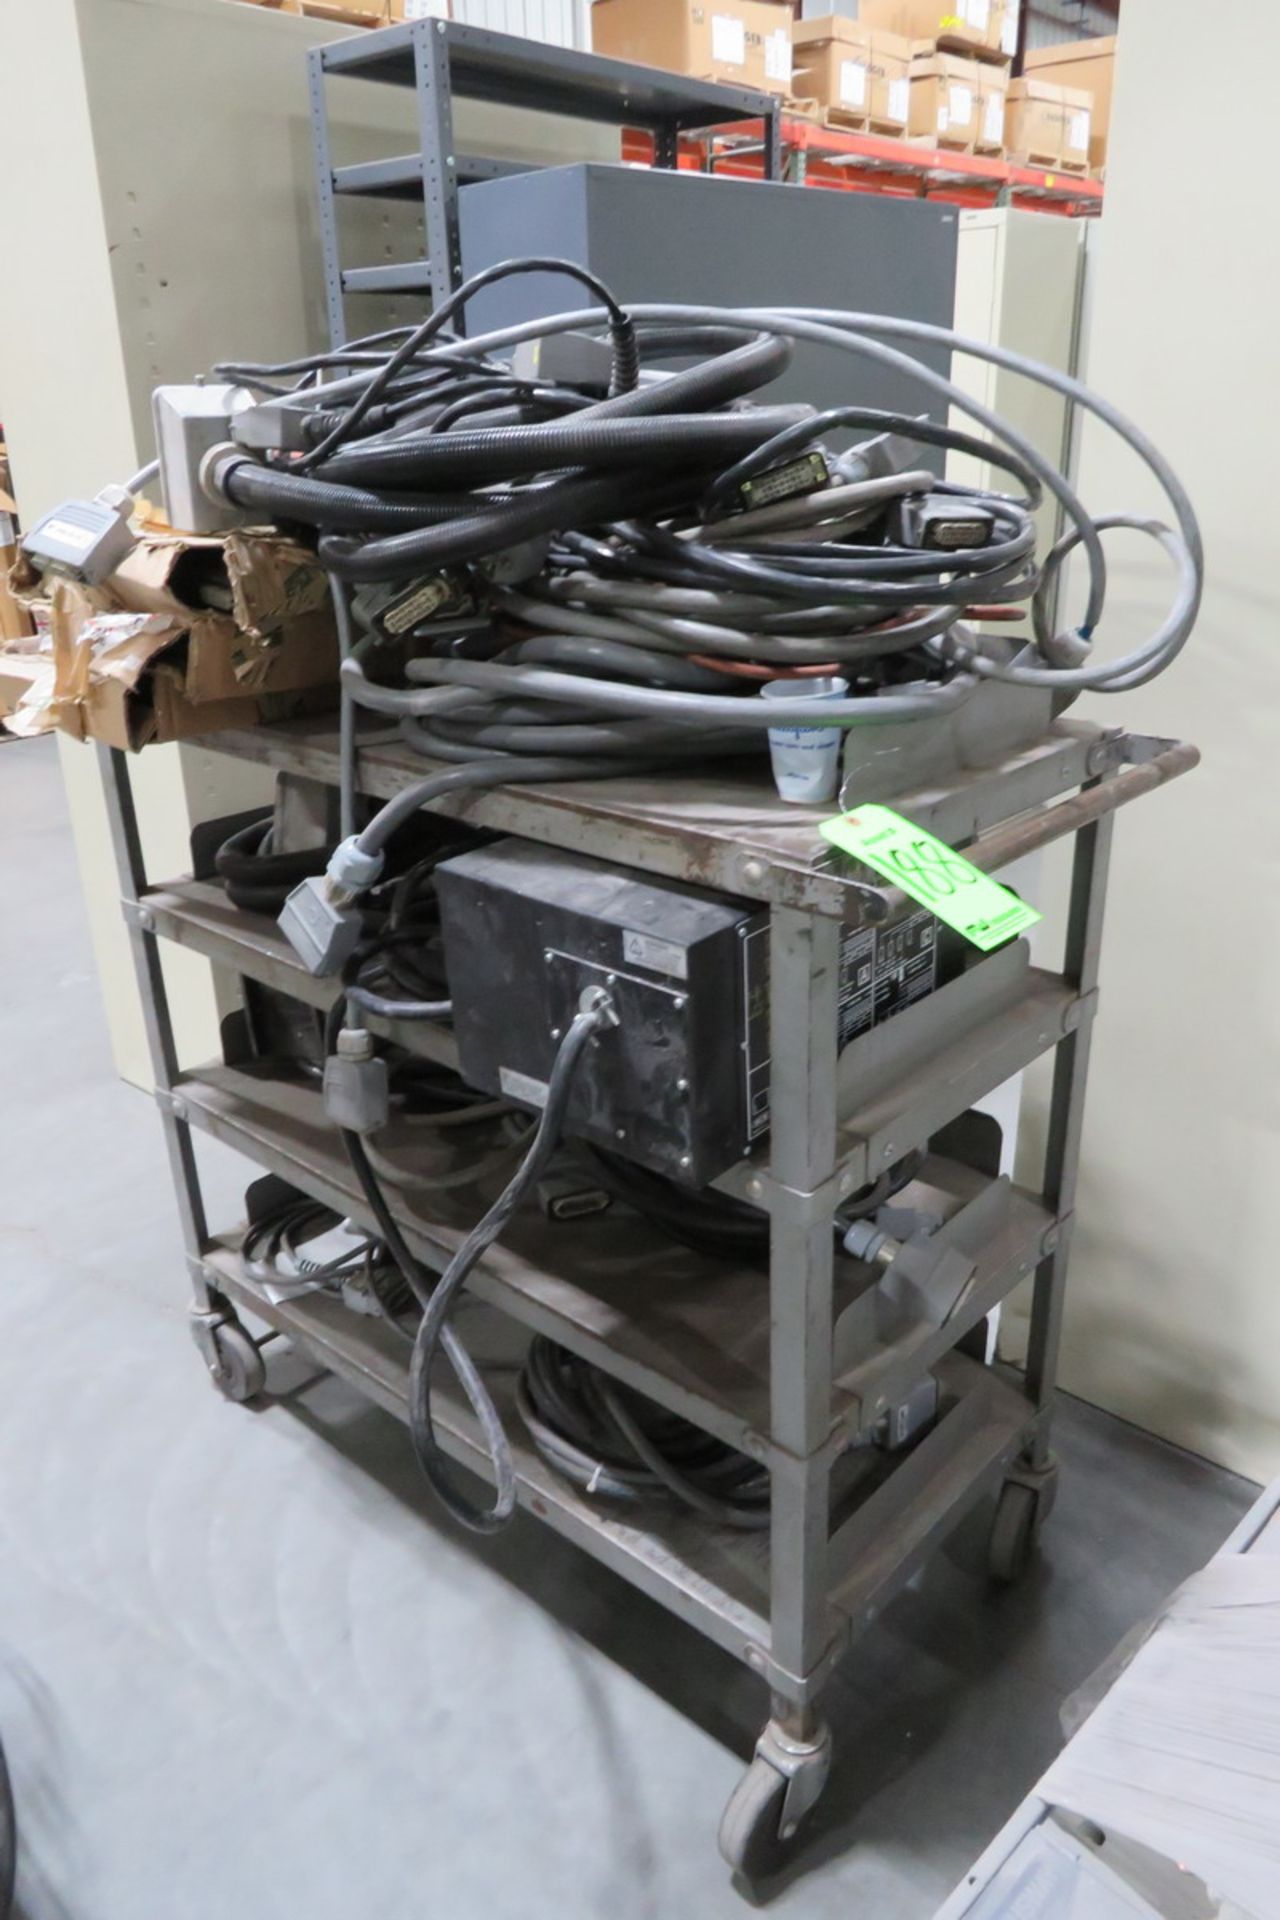 Hot Runner Controller Housing, Assorted Cabling, Material Cart - Image 2 of 3